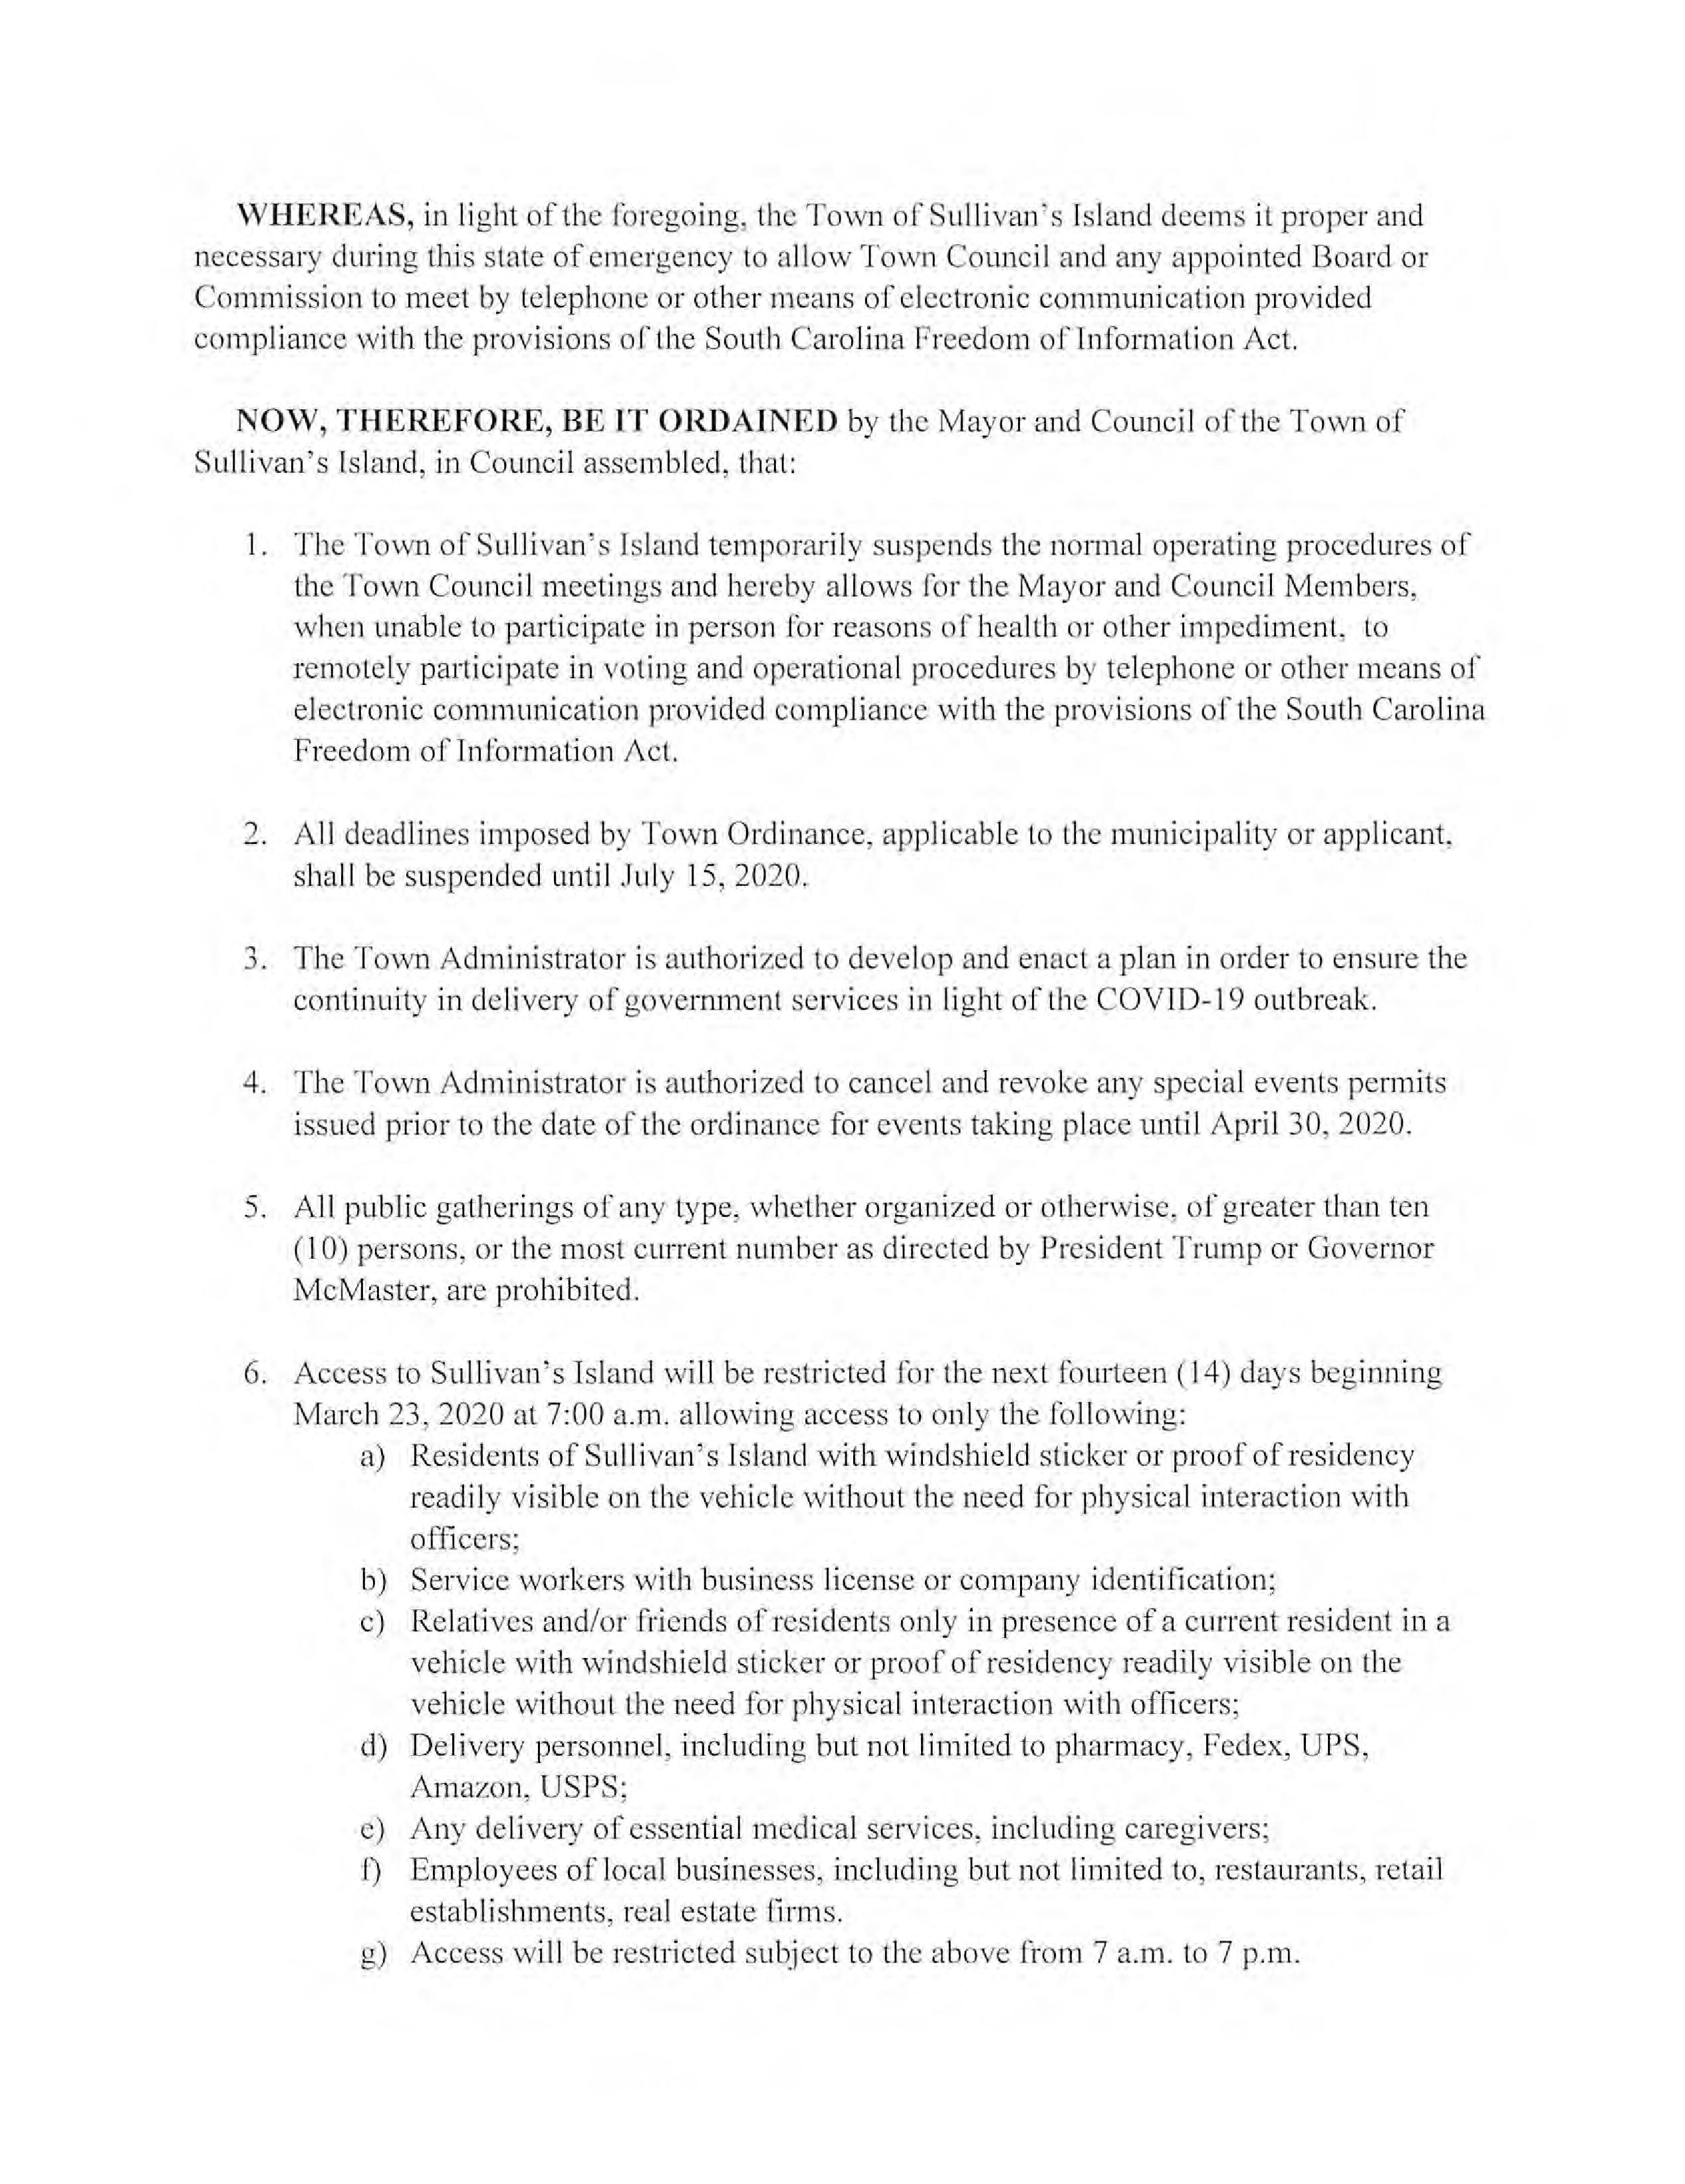 Emergency Ordinance 2020-03 Page 2 (pic)